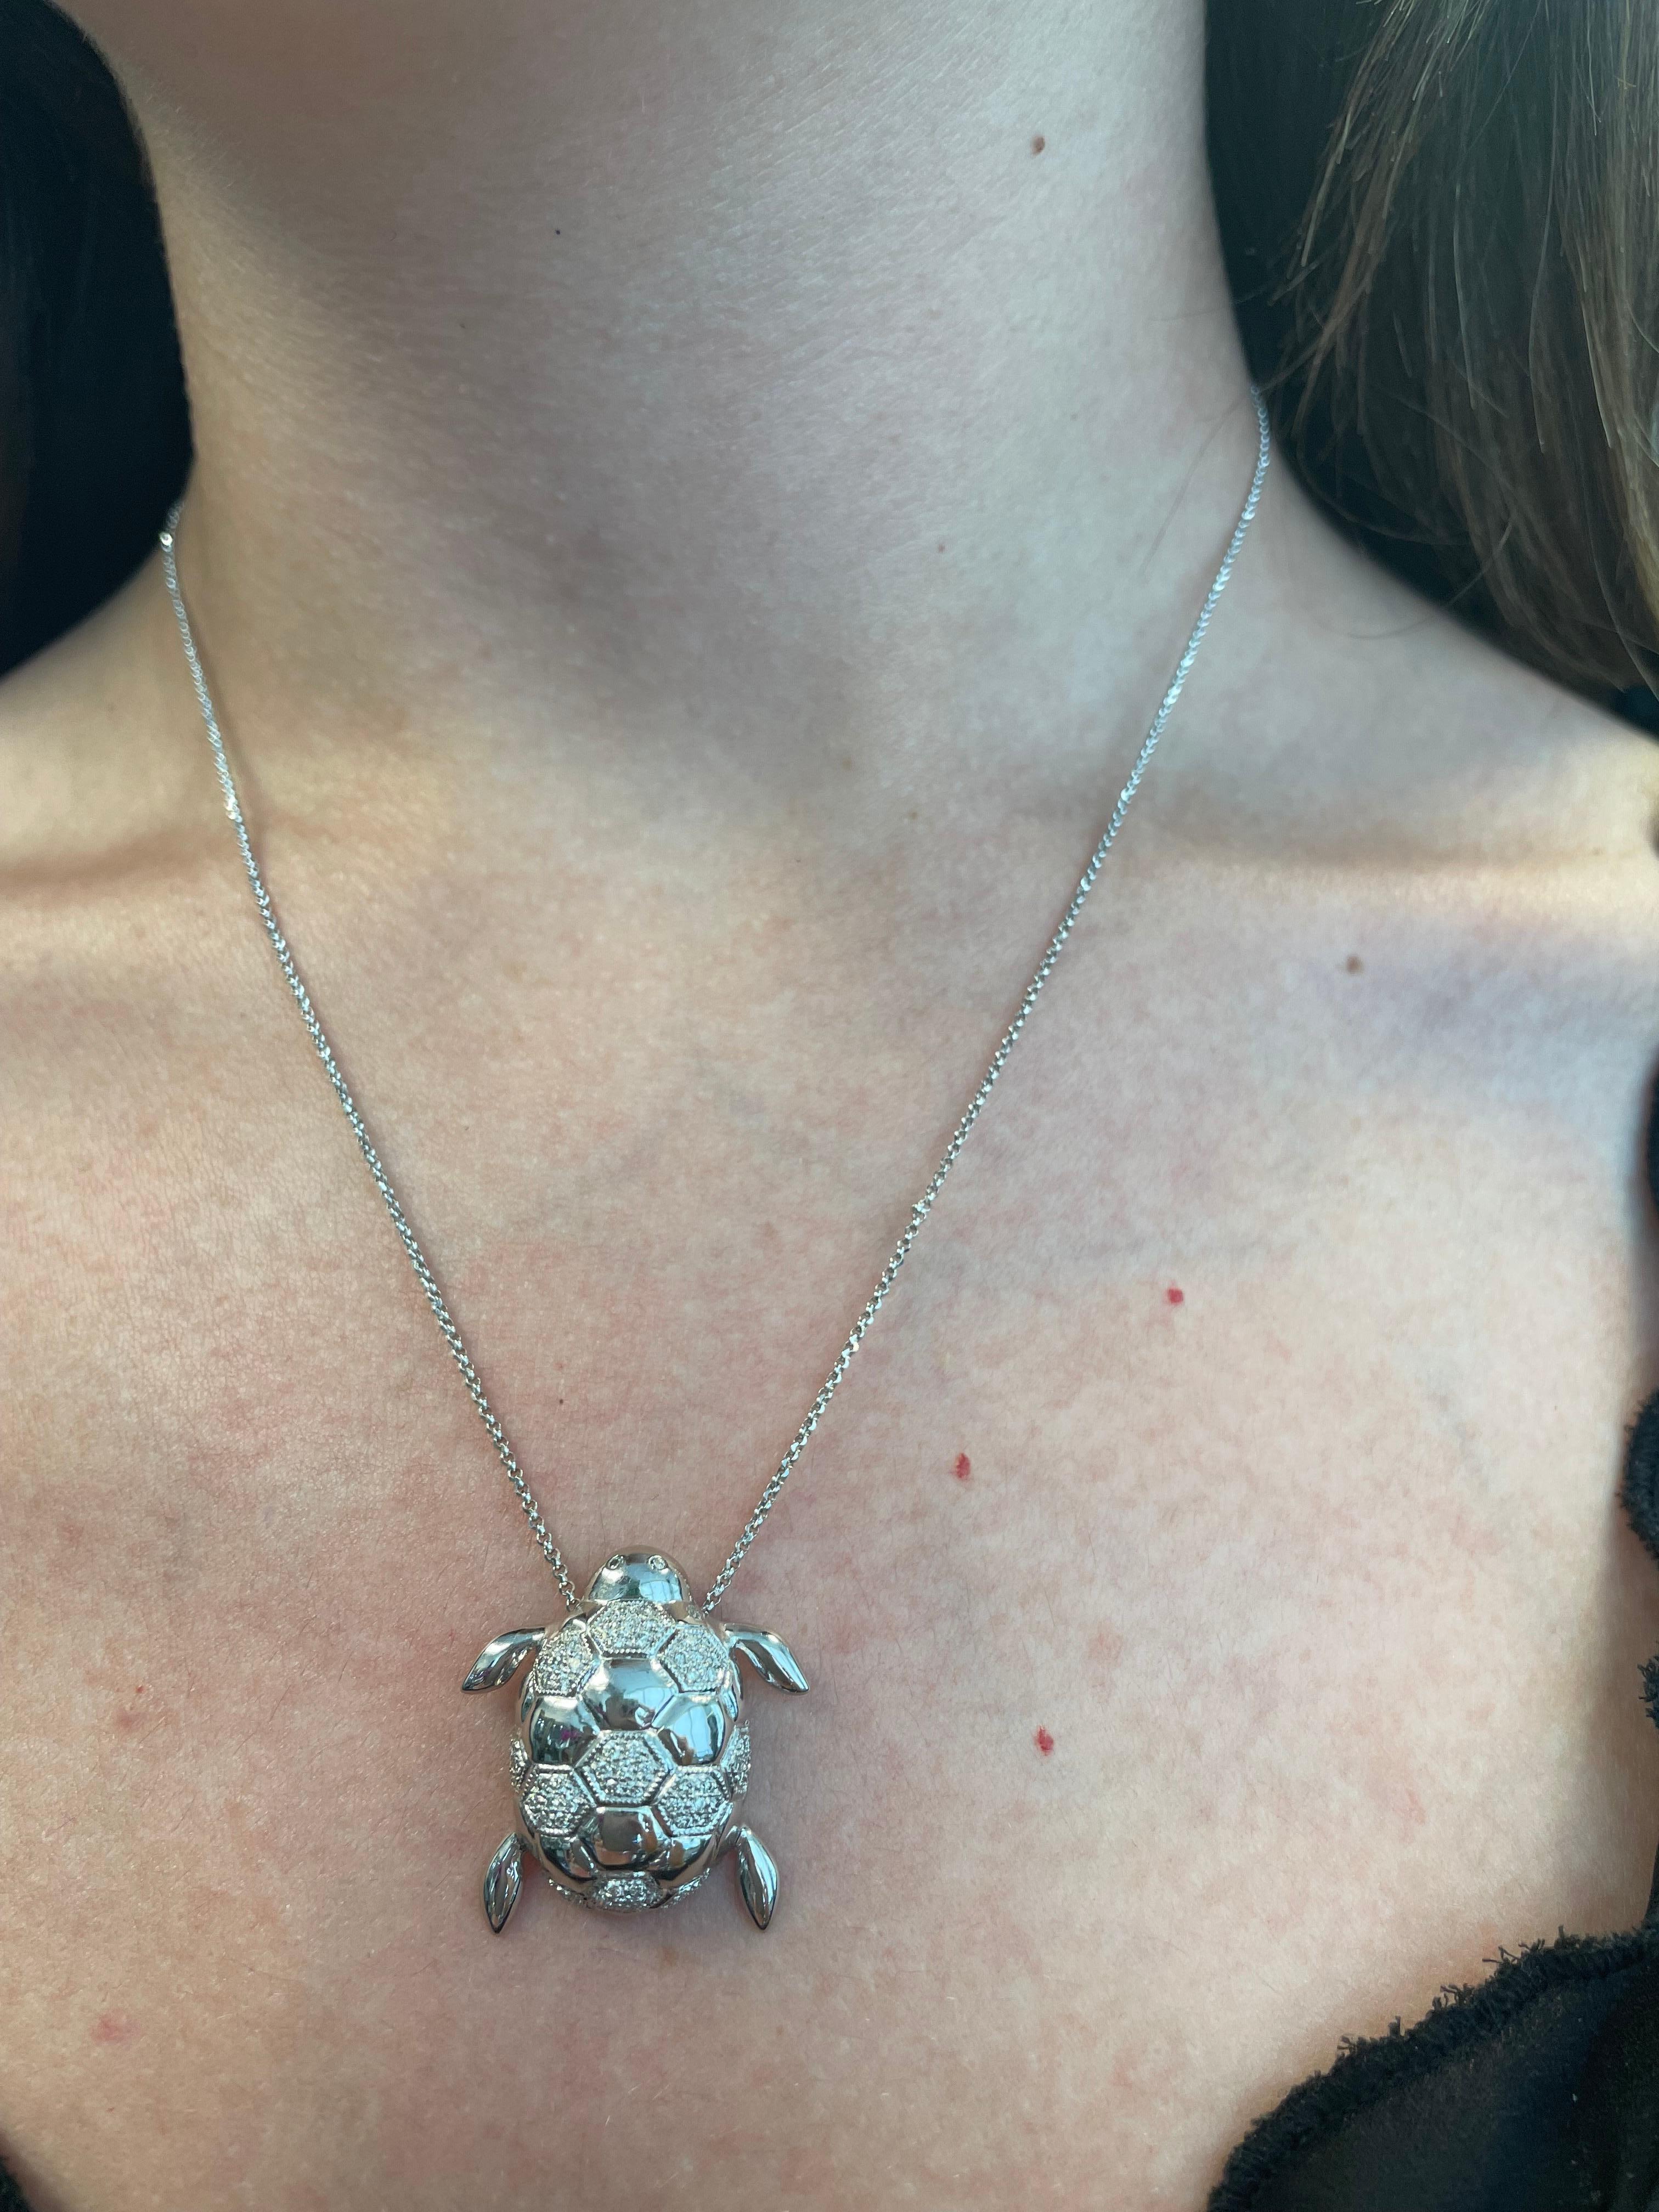 Beautiful modern diamond turtle necklace white gold.

0.43ct of round diamonds, approximately G/H color and SI clarity. 18-karat white gold.

Accommodated with an up-to-date digital appraisal by a GIA G.G. once purchased, upon request. Please